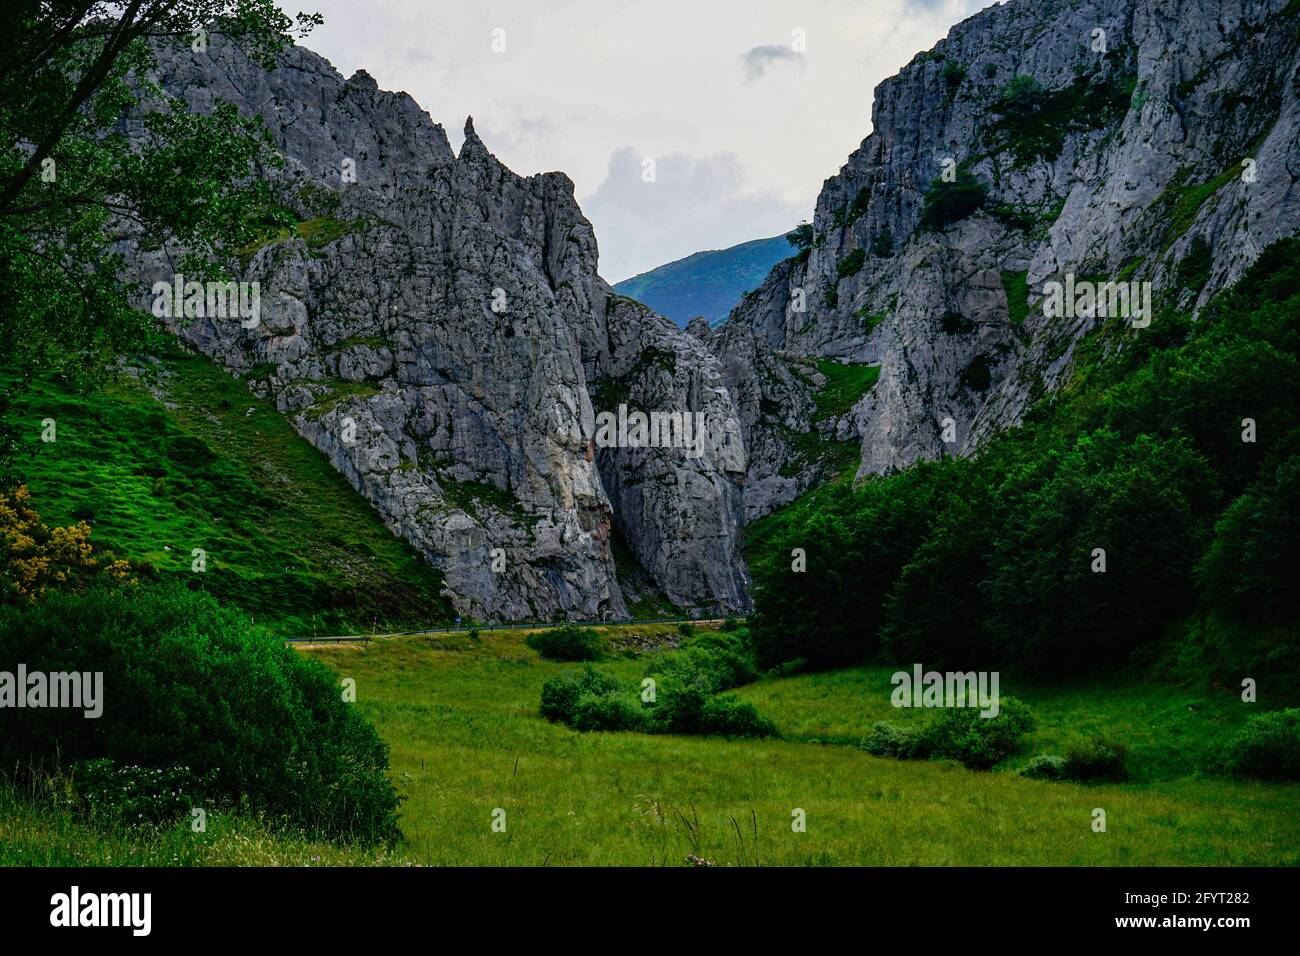 The rocky mountains in the Fuentes Carrionas natural park Stock Photo